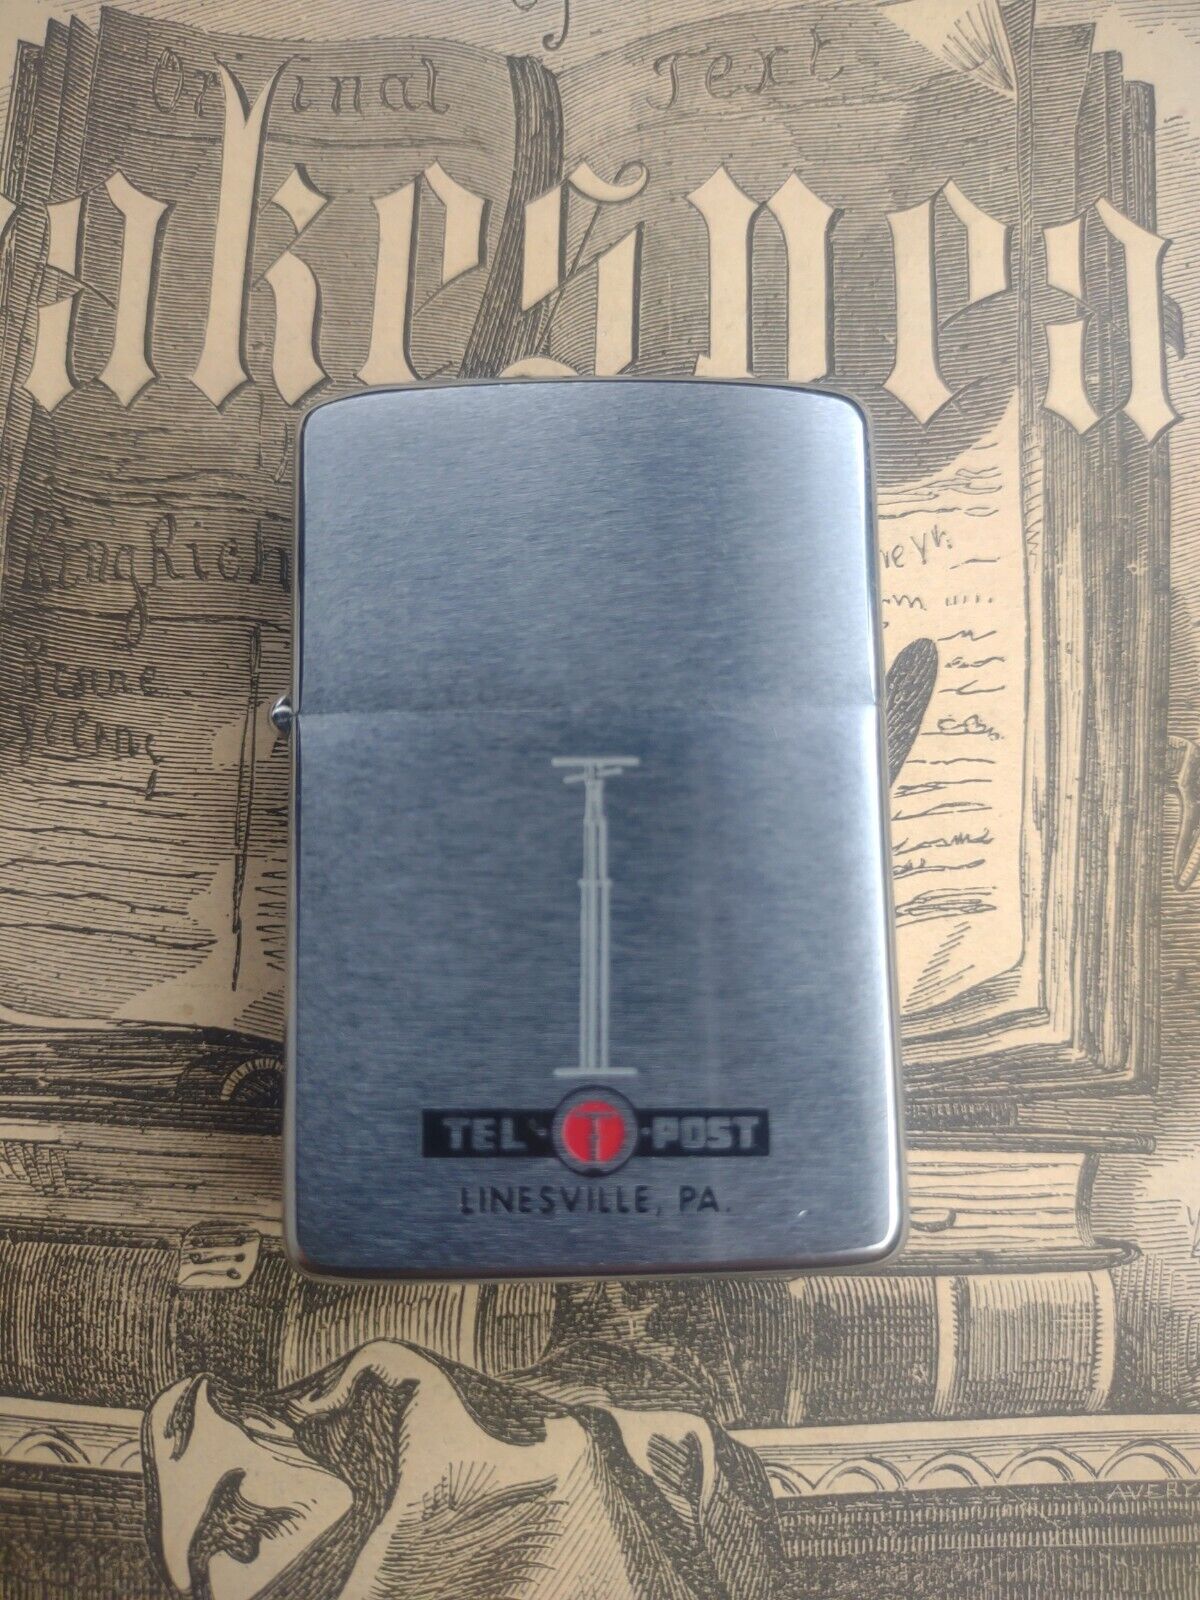 Vintage Zippo 1964 Never Fired Tel-O-Post Advertising.